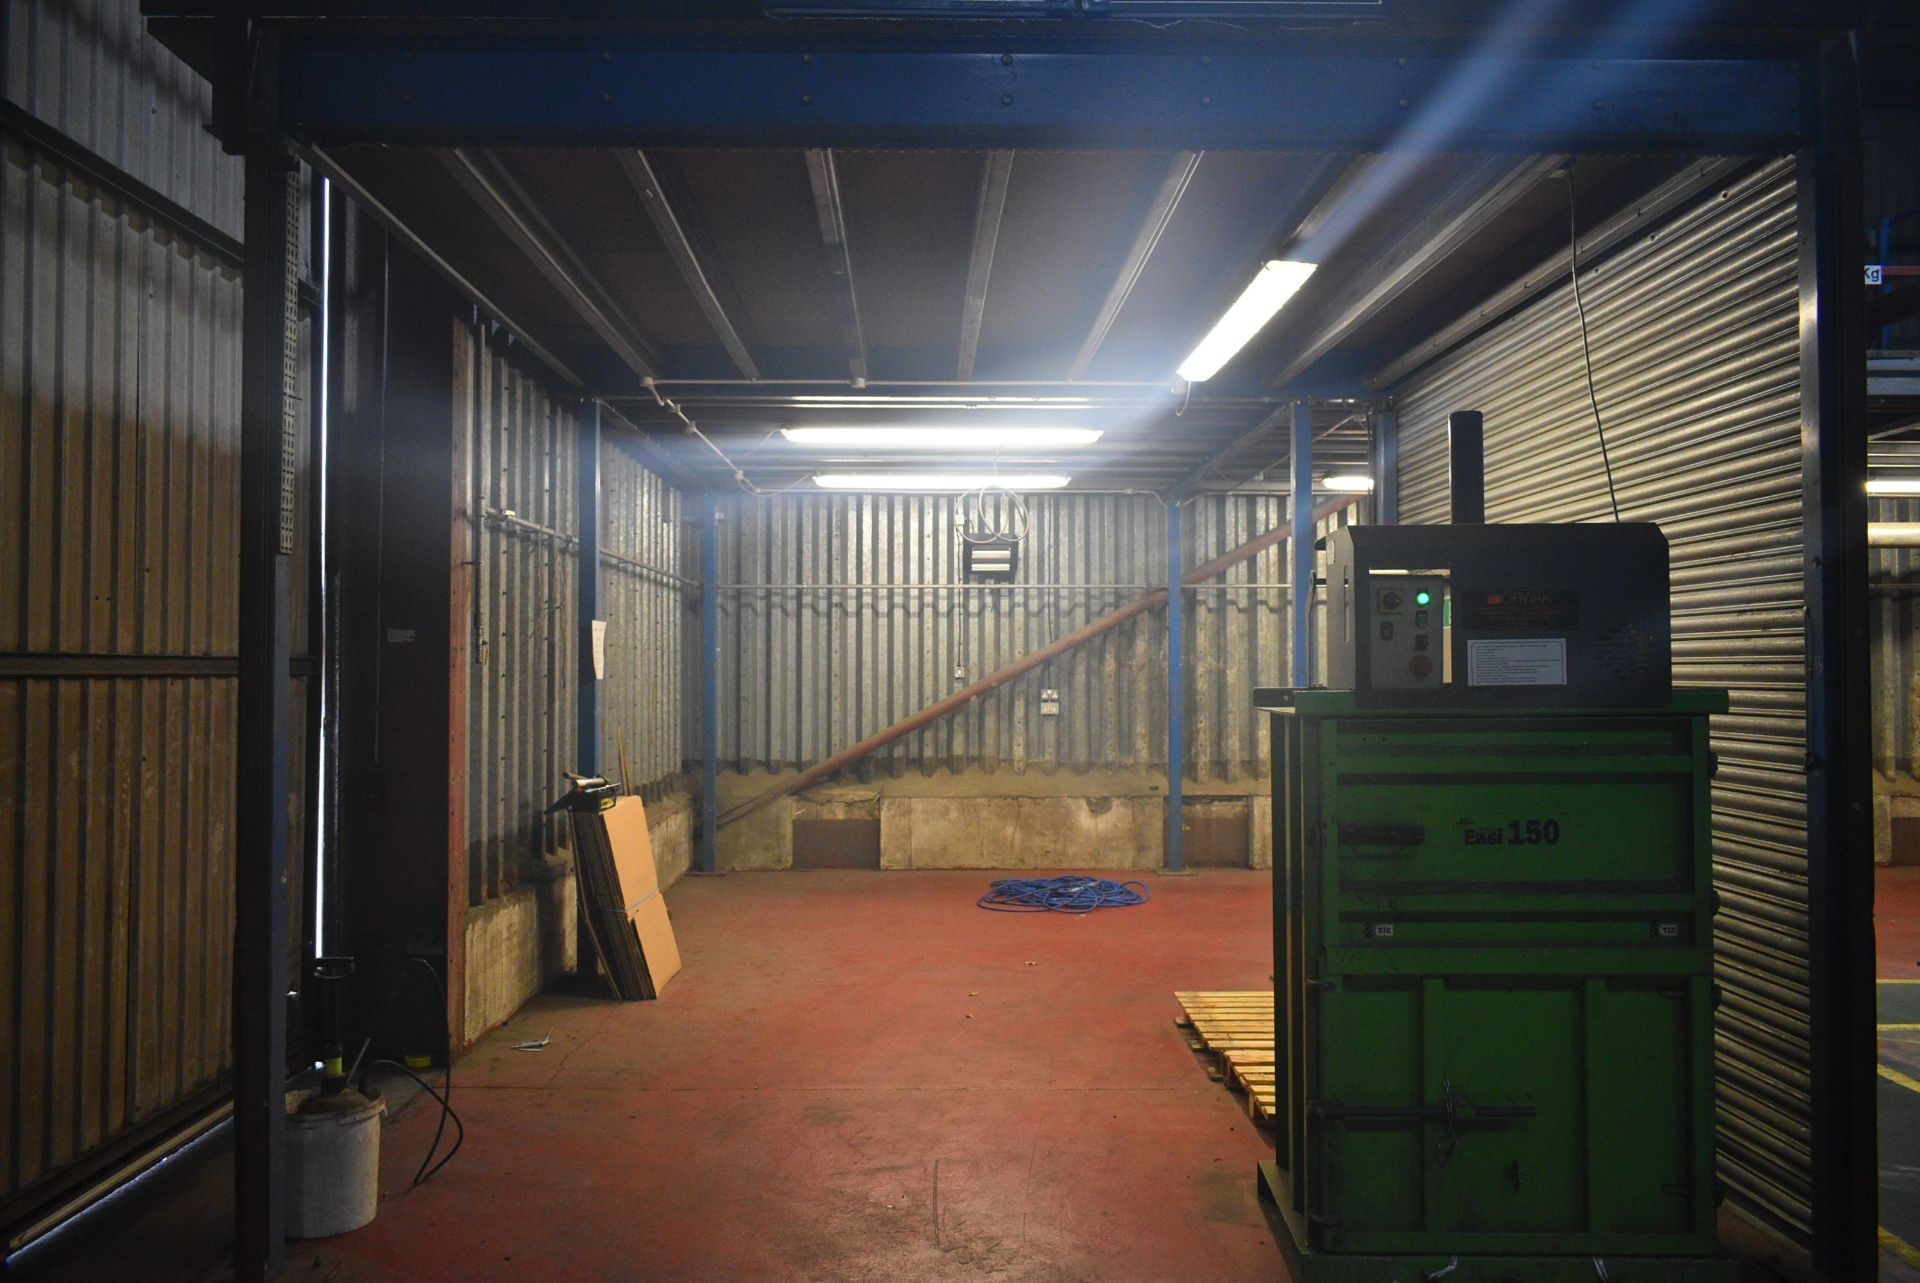 BOLTED STEEL L-SHAPED MEZZANINE FLOOR, approx. 24.6m x 3.8m x 3.3m high to floor level, extension - Image 9 of 12